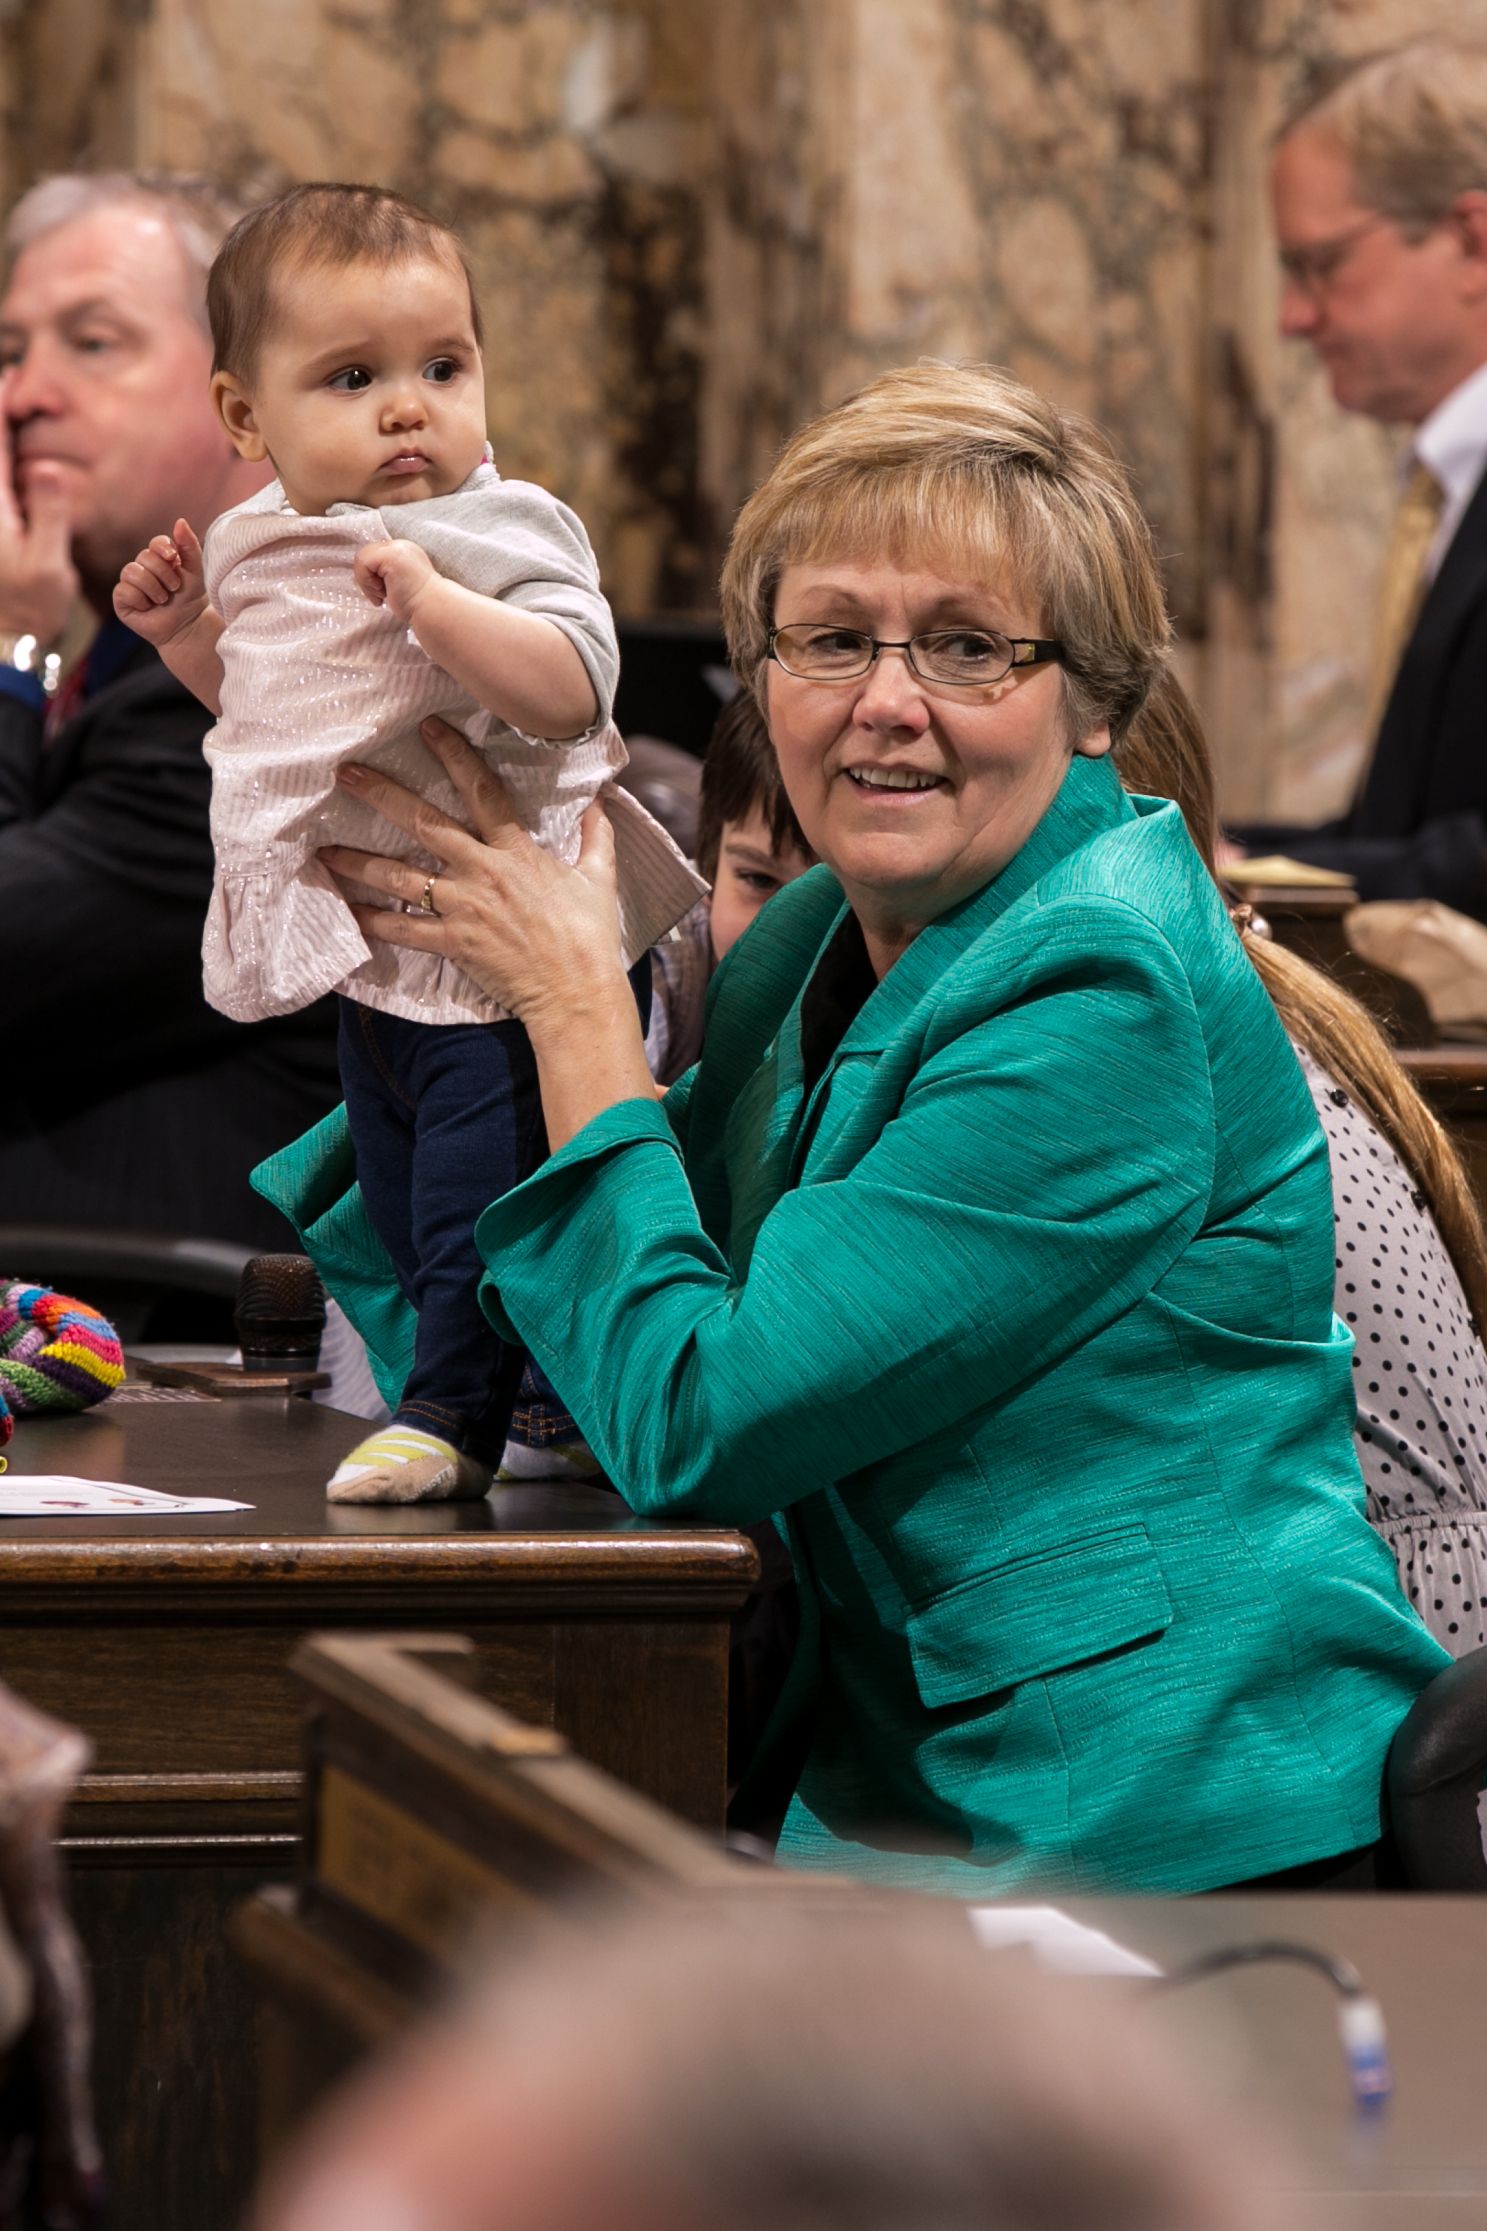 Rep Dawn Morrell with family during Children's Day on the House Floor.